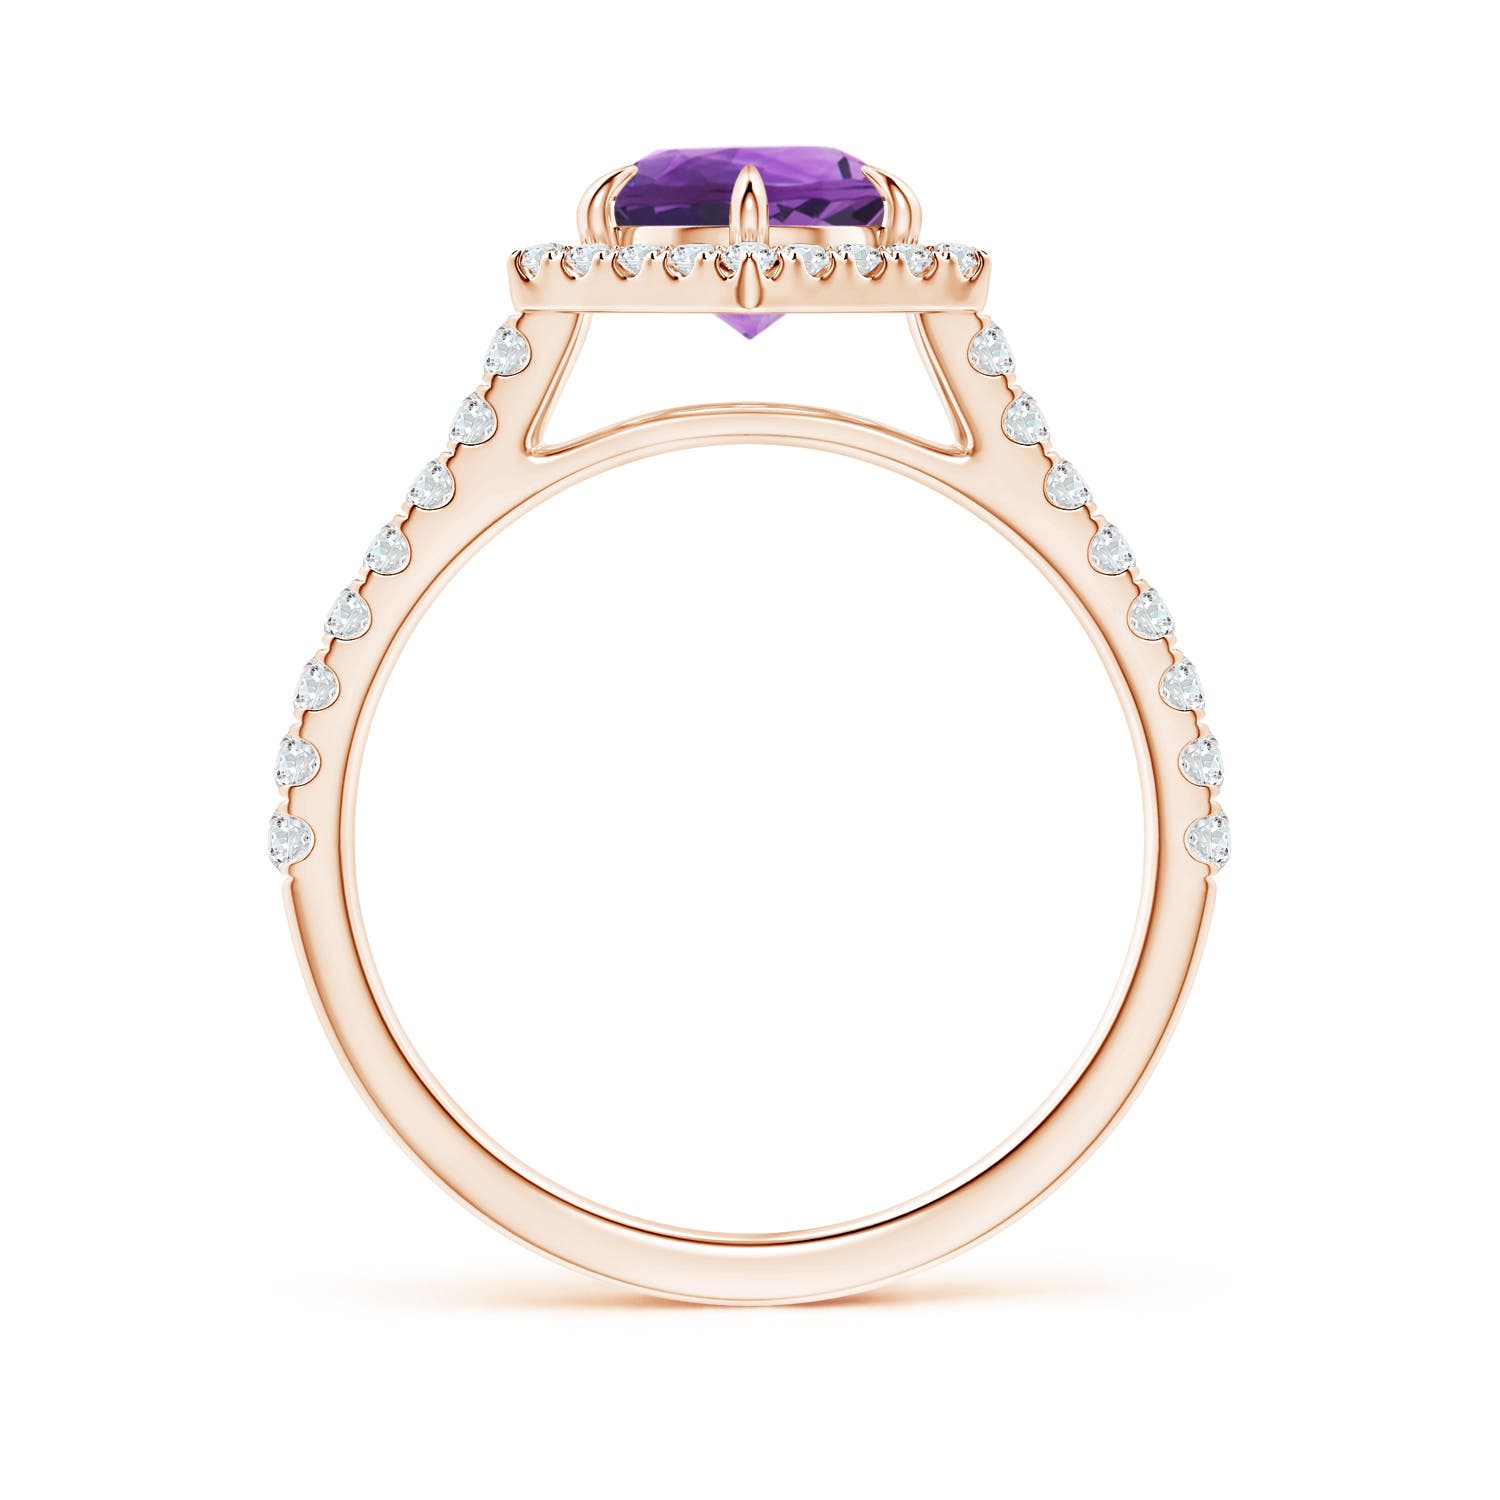 AAA - Amethyst / 1.57 CT / 14 KT Rose Gold